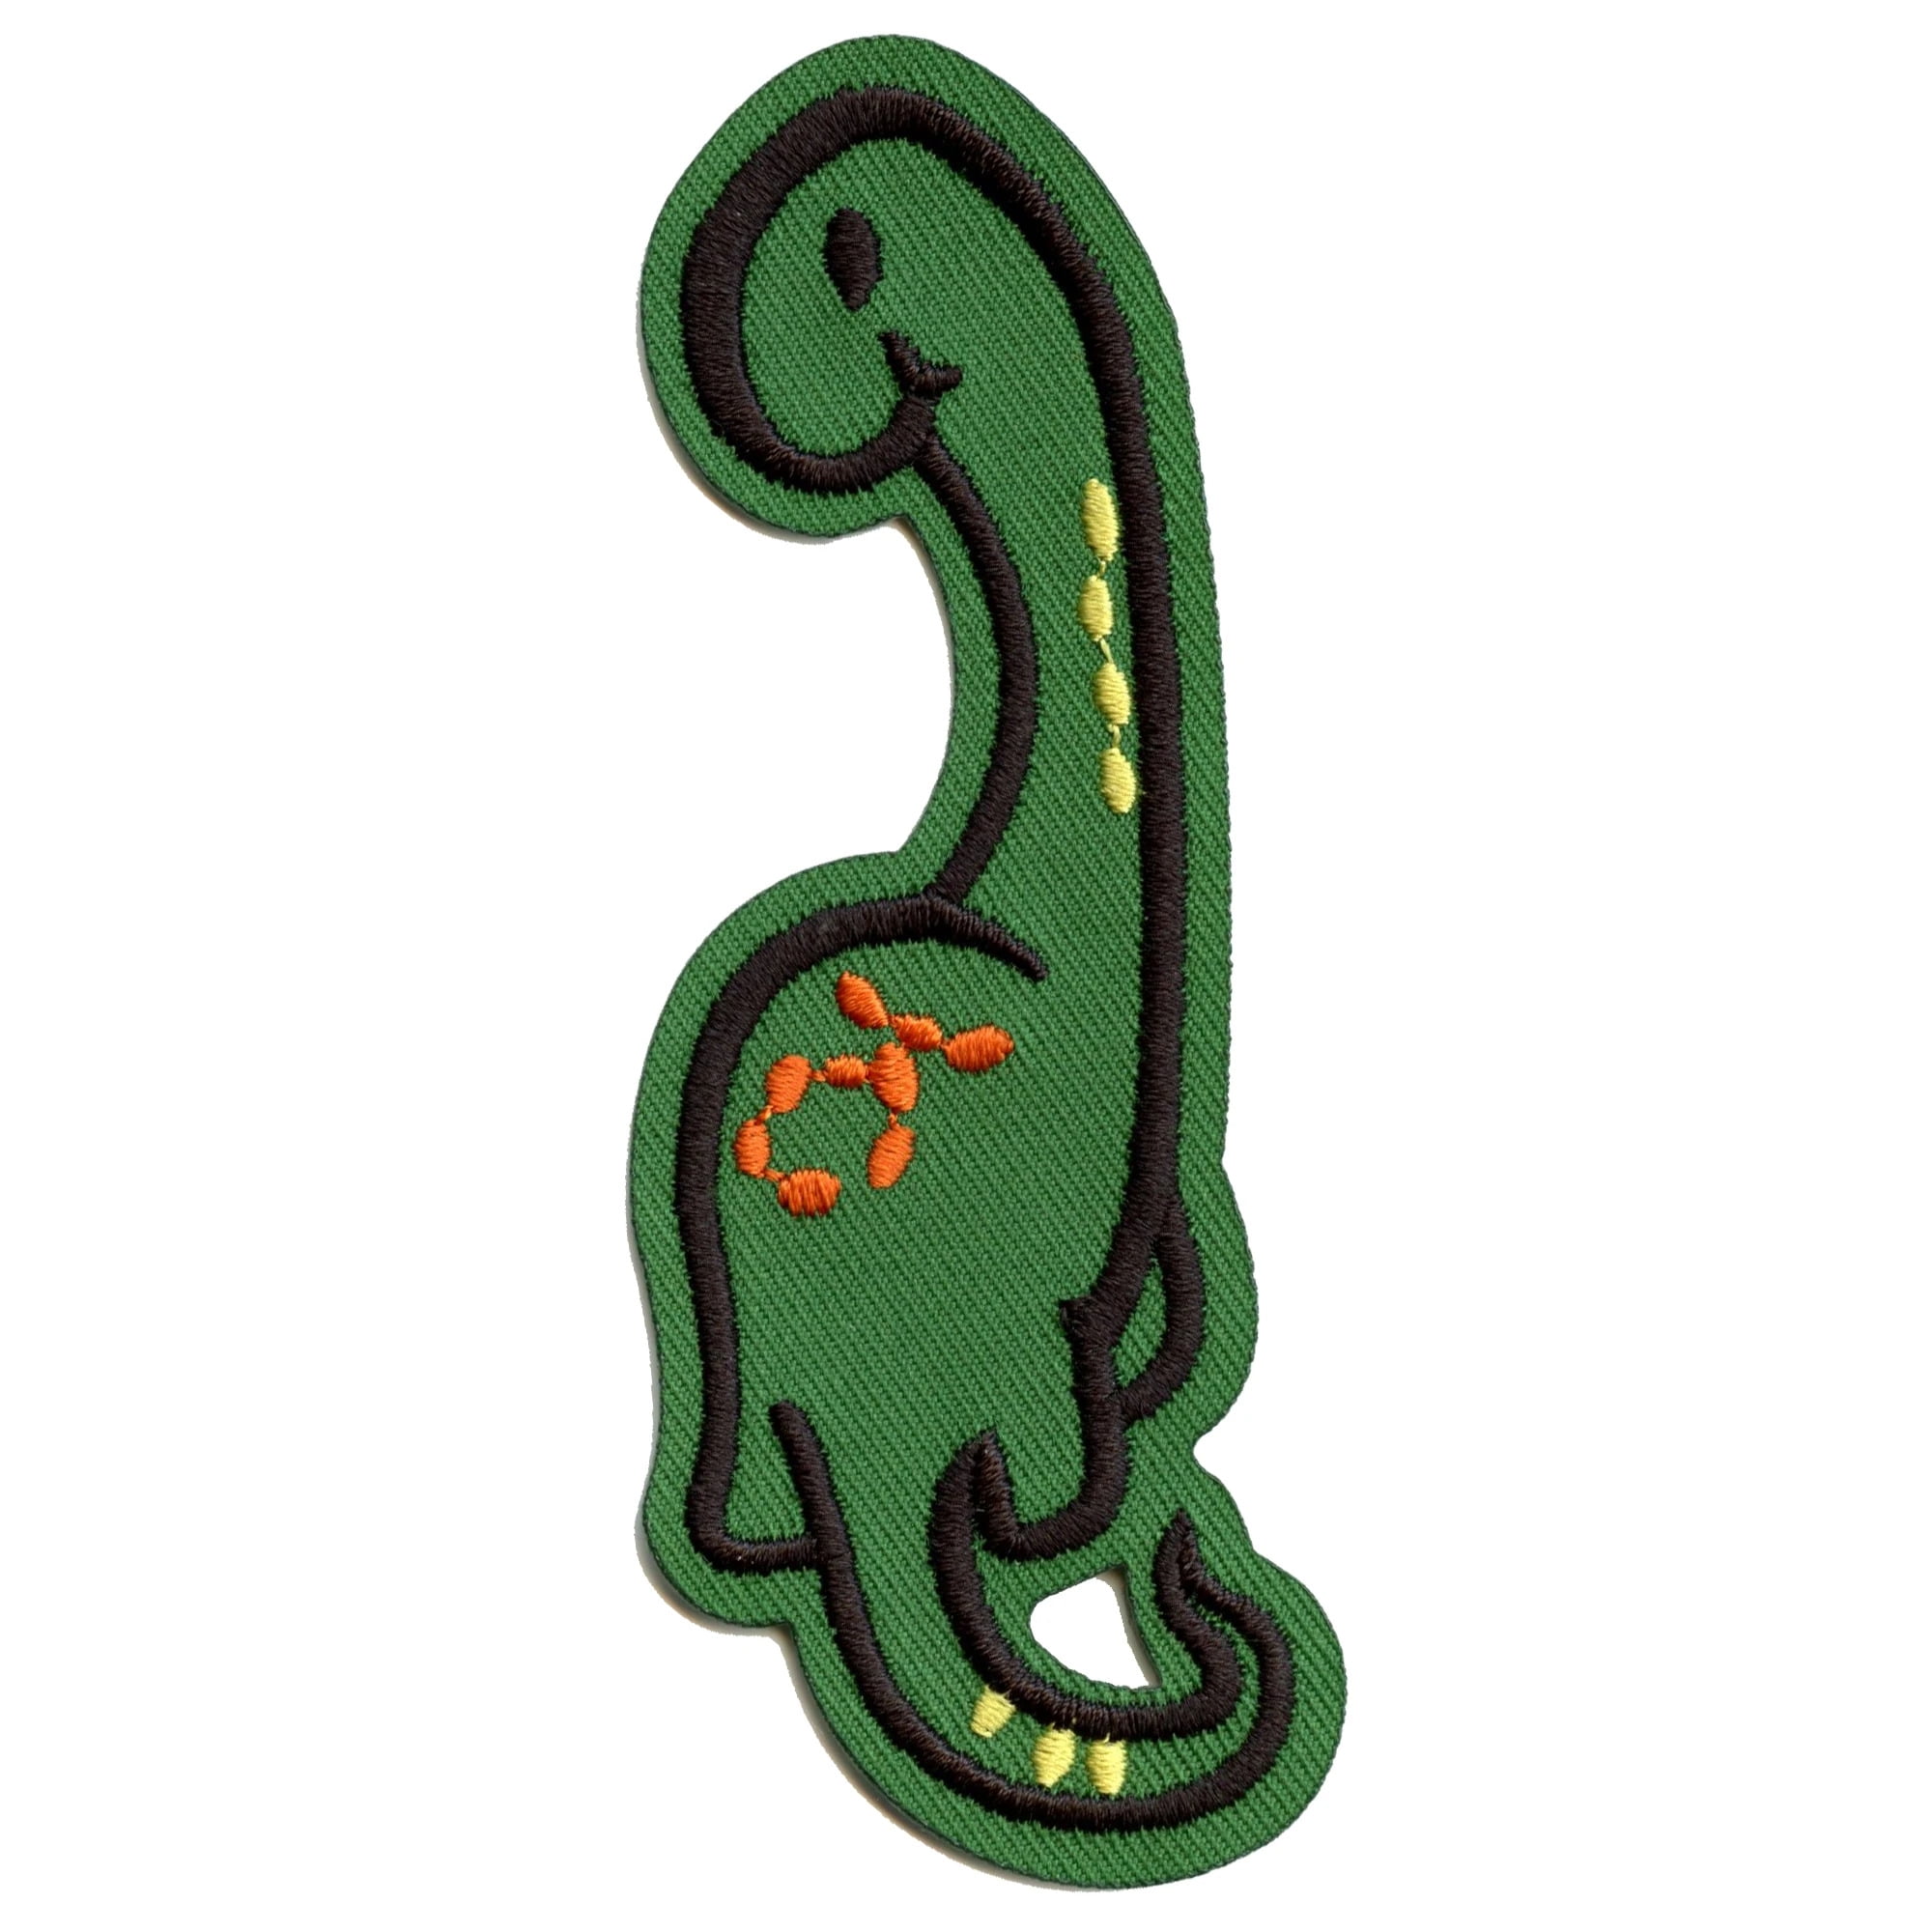 Green Dinosaur Iron On Patch, Embroidery Patch, Cute Kawaii Patch, Sew On  Patch, Craft Supply, DIY Patches 12